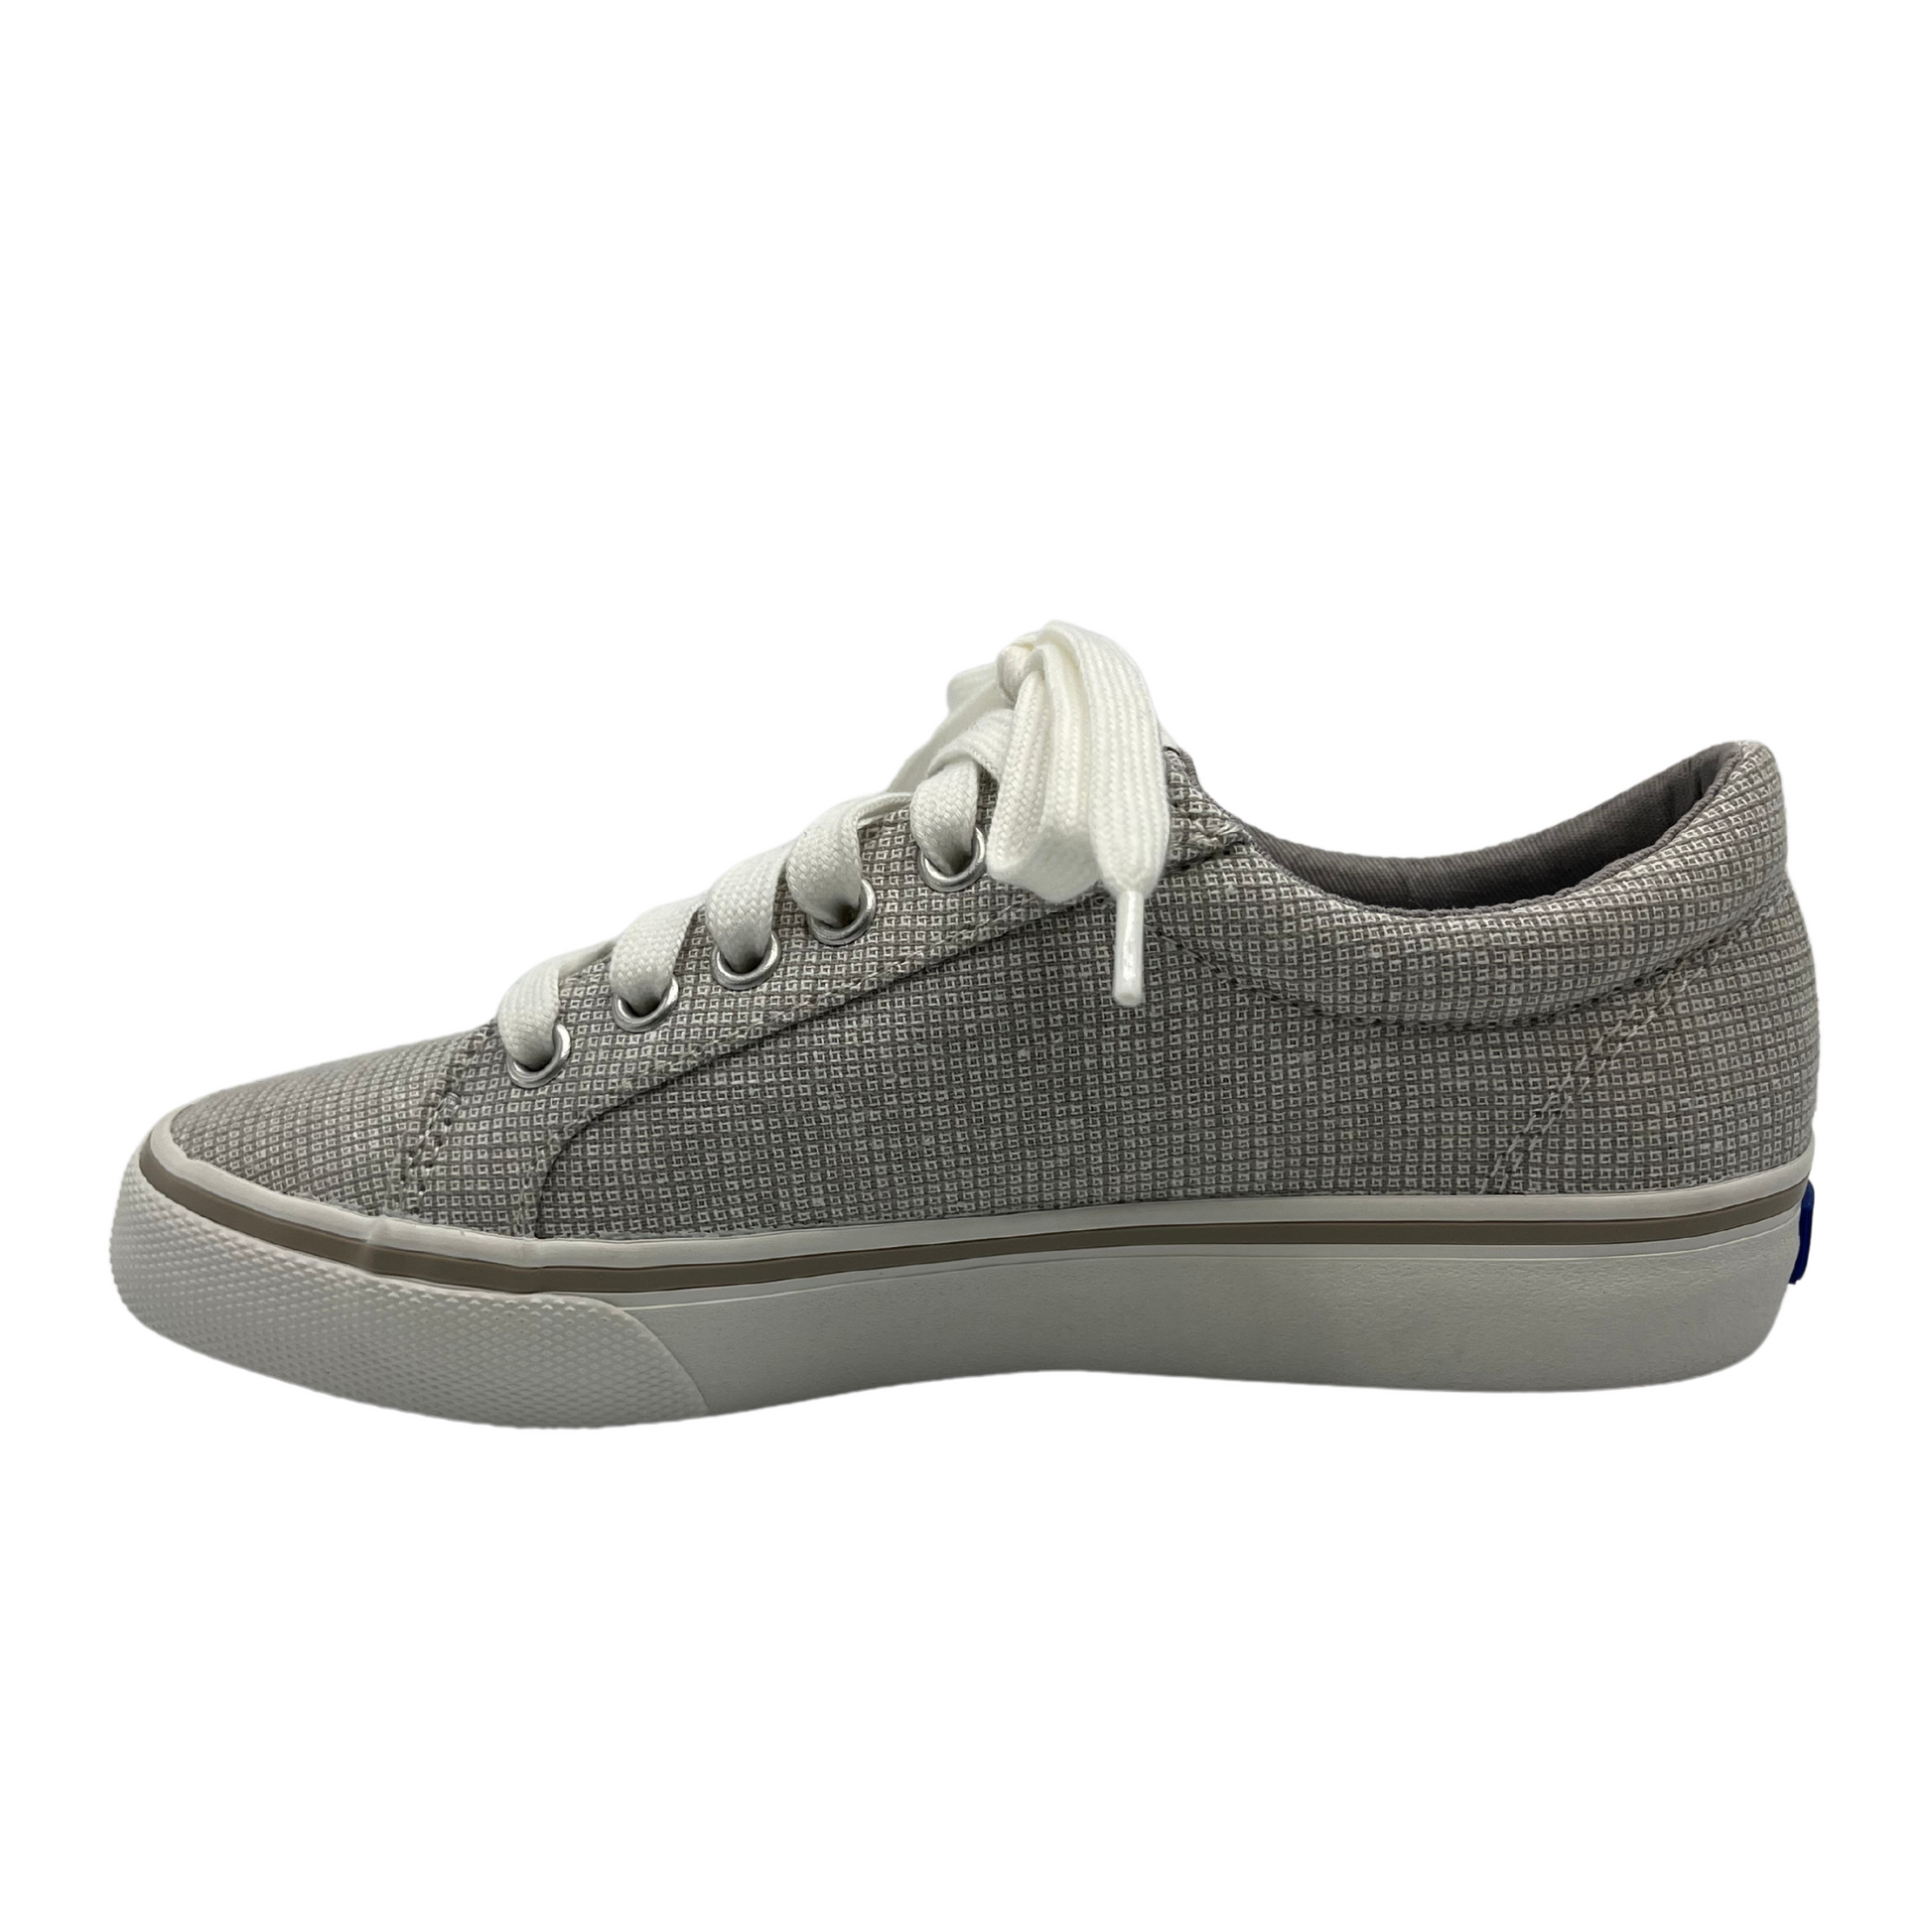 Left facing view of grey check canvas sneaker with white rubber outsole, white laces and padded collar